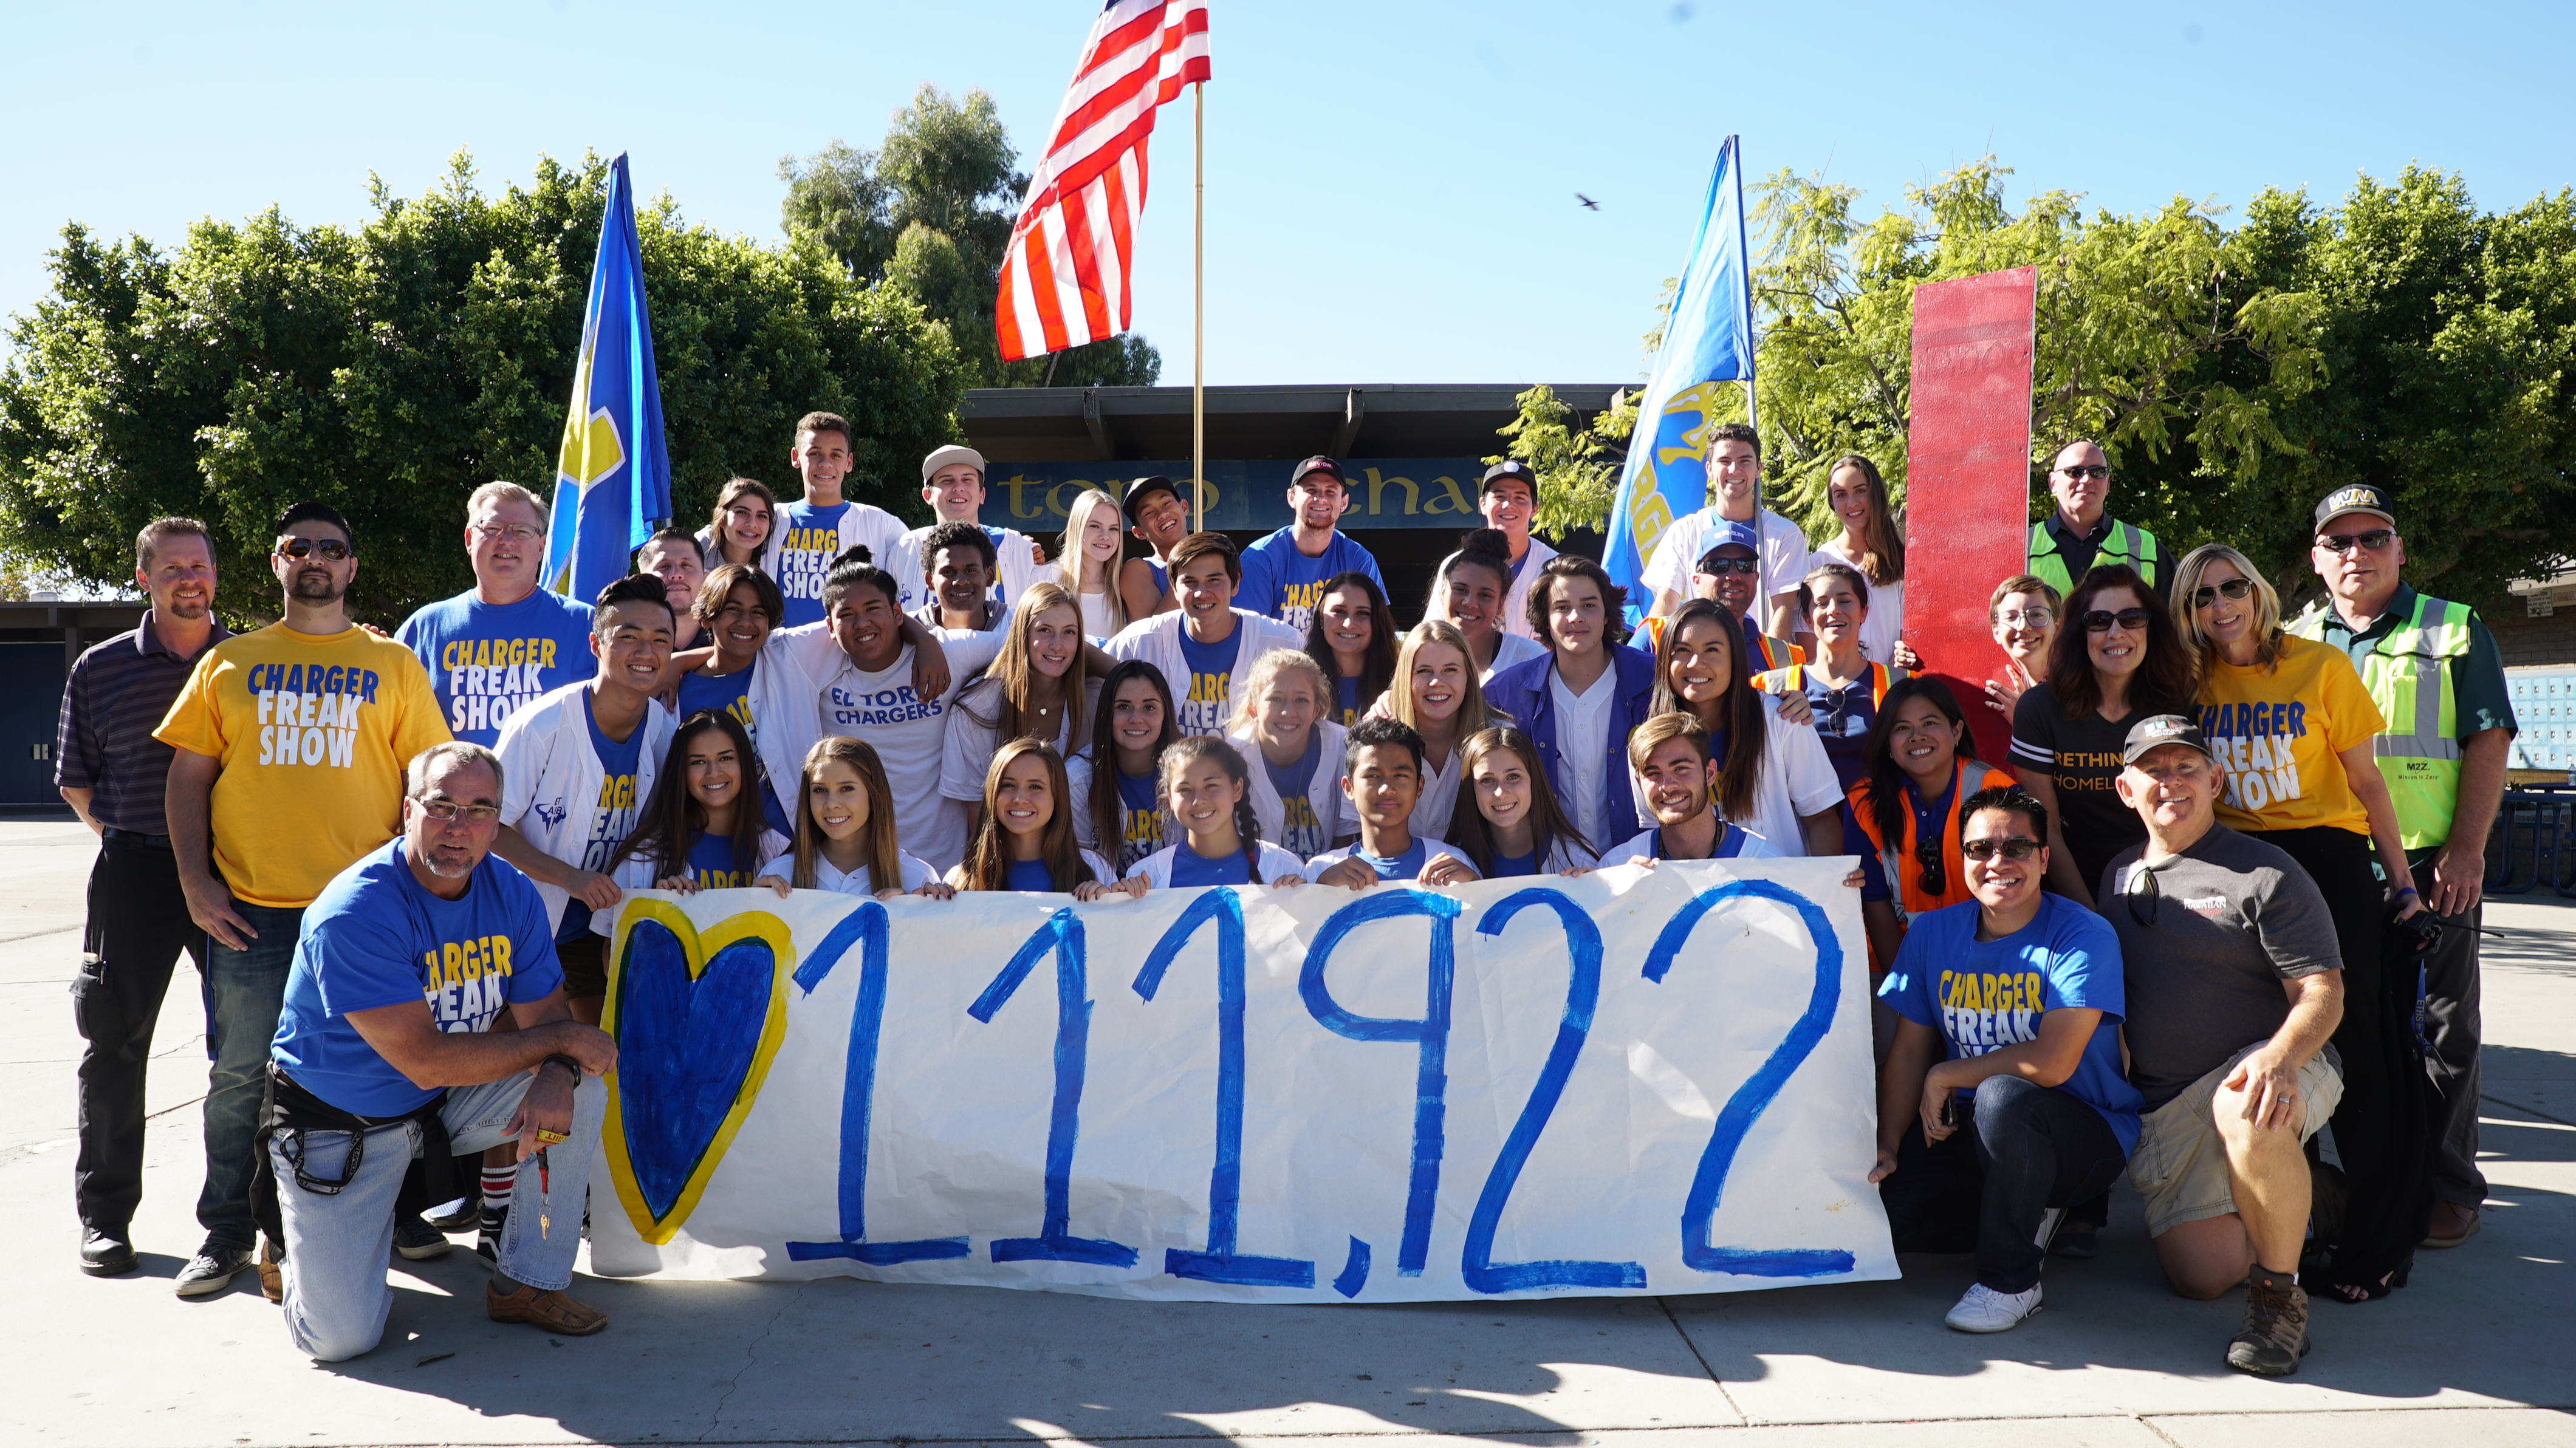 el toro high school 111,922 cans donated group picture